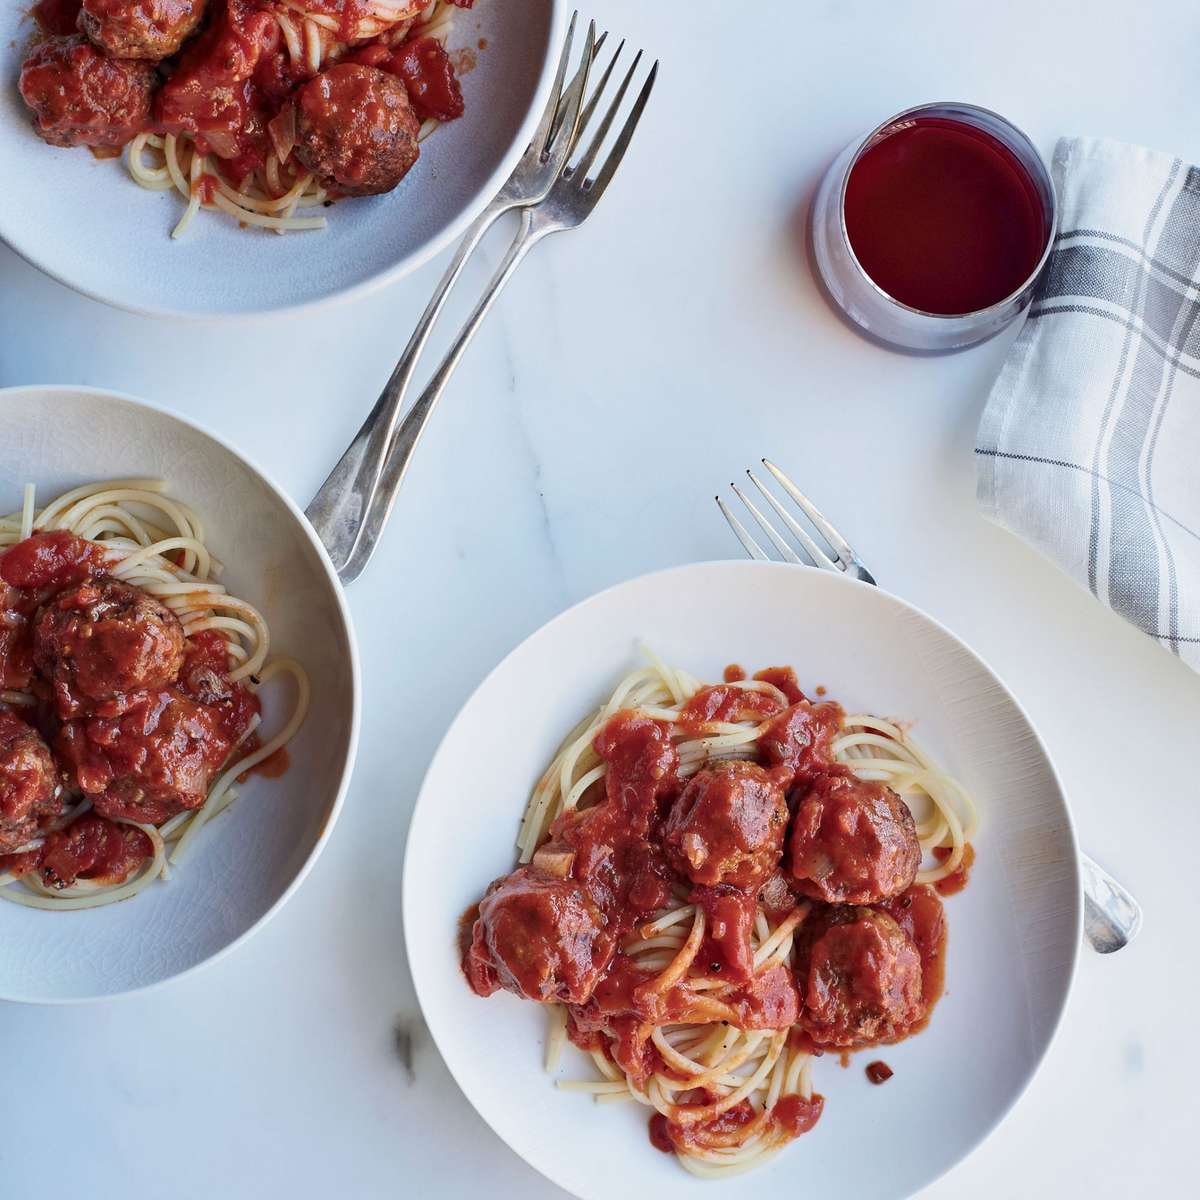 Spaghetti with Veal Meatballs by Andrew Zimmern